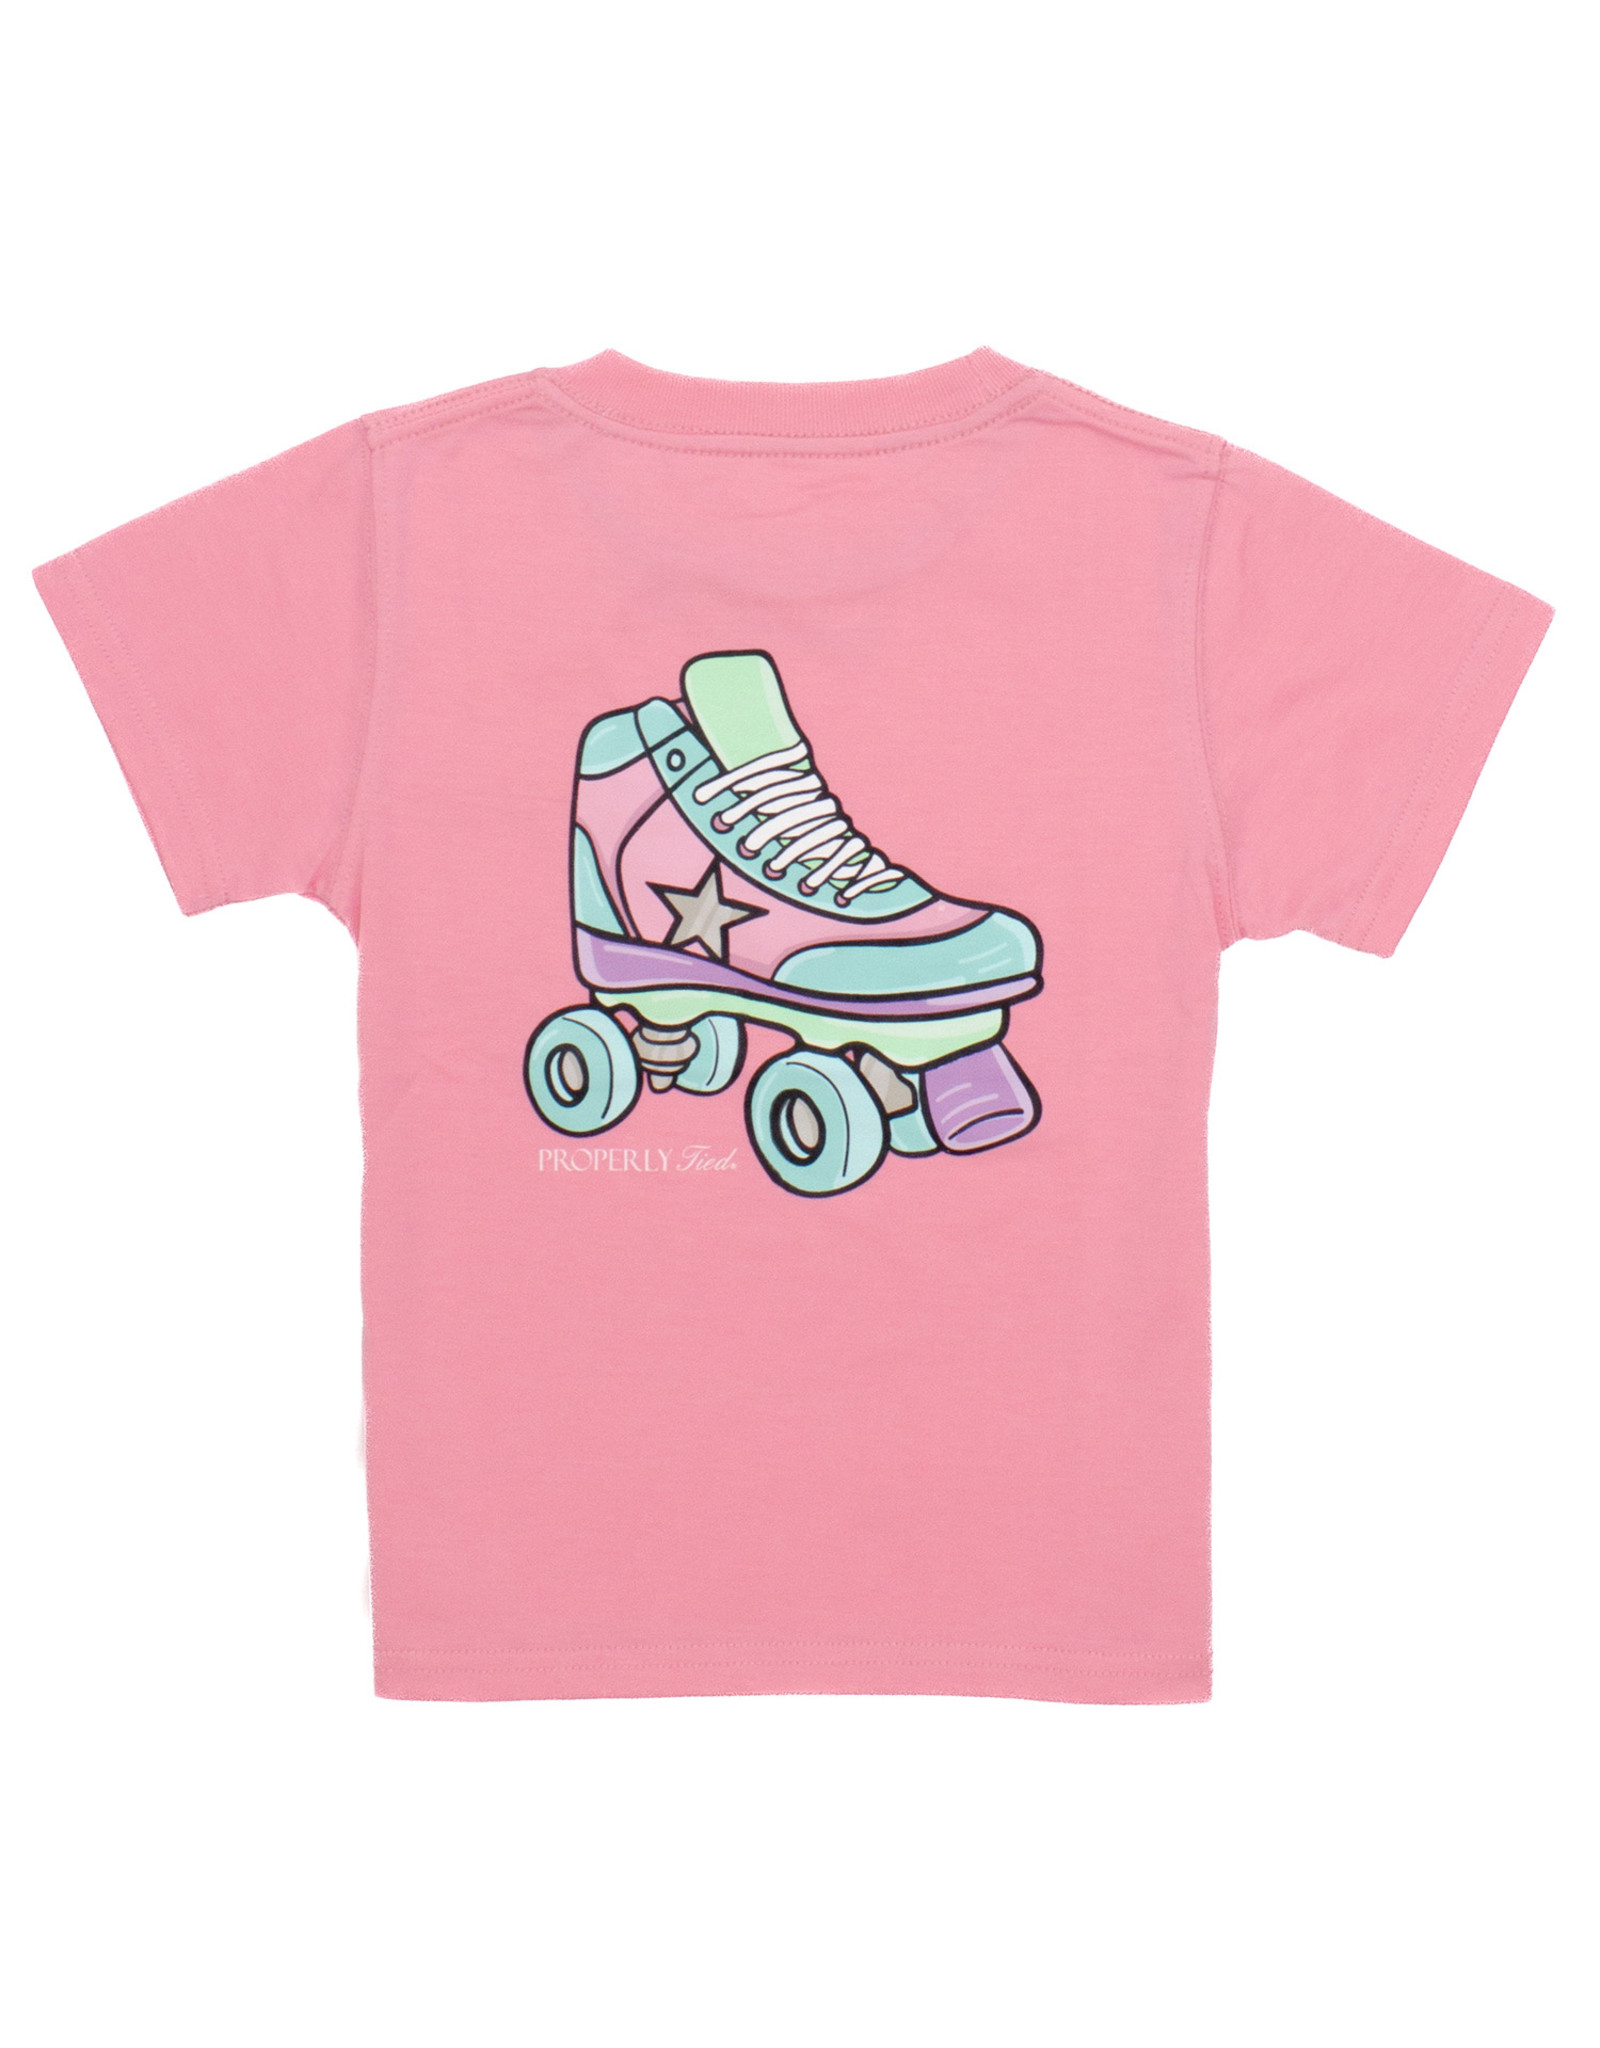 Properly Tied Graphic Tees Girls